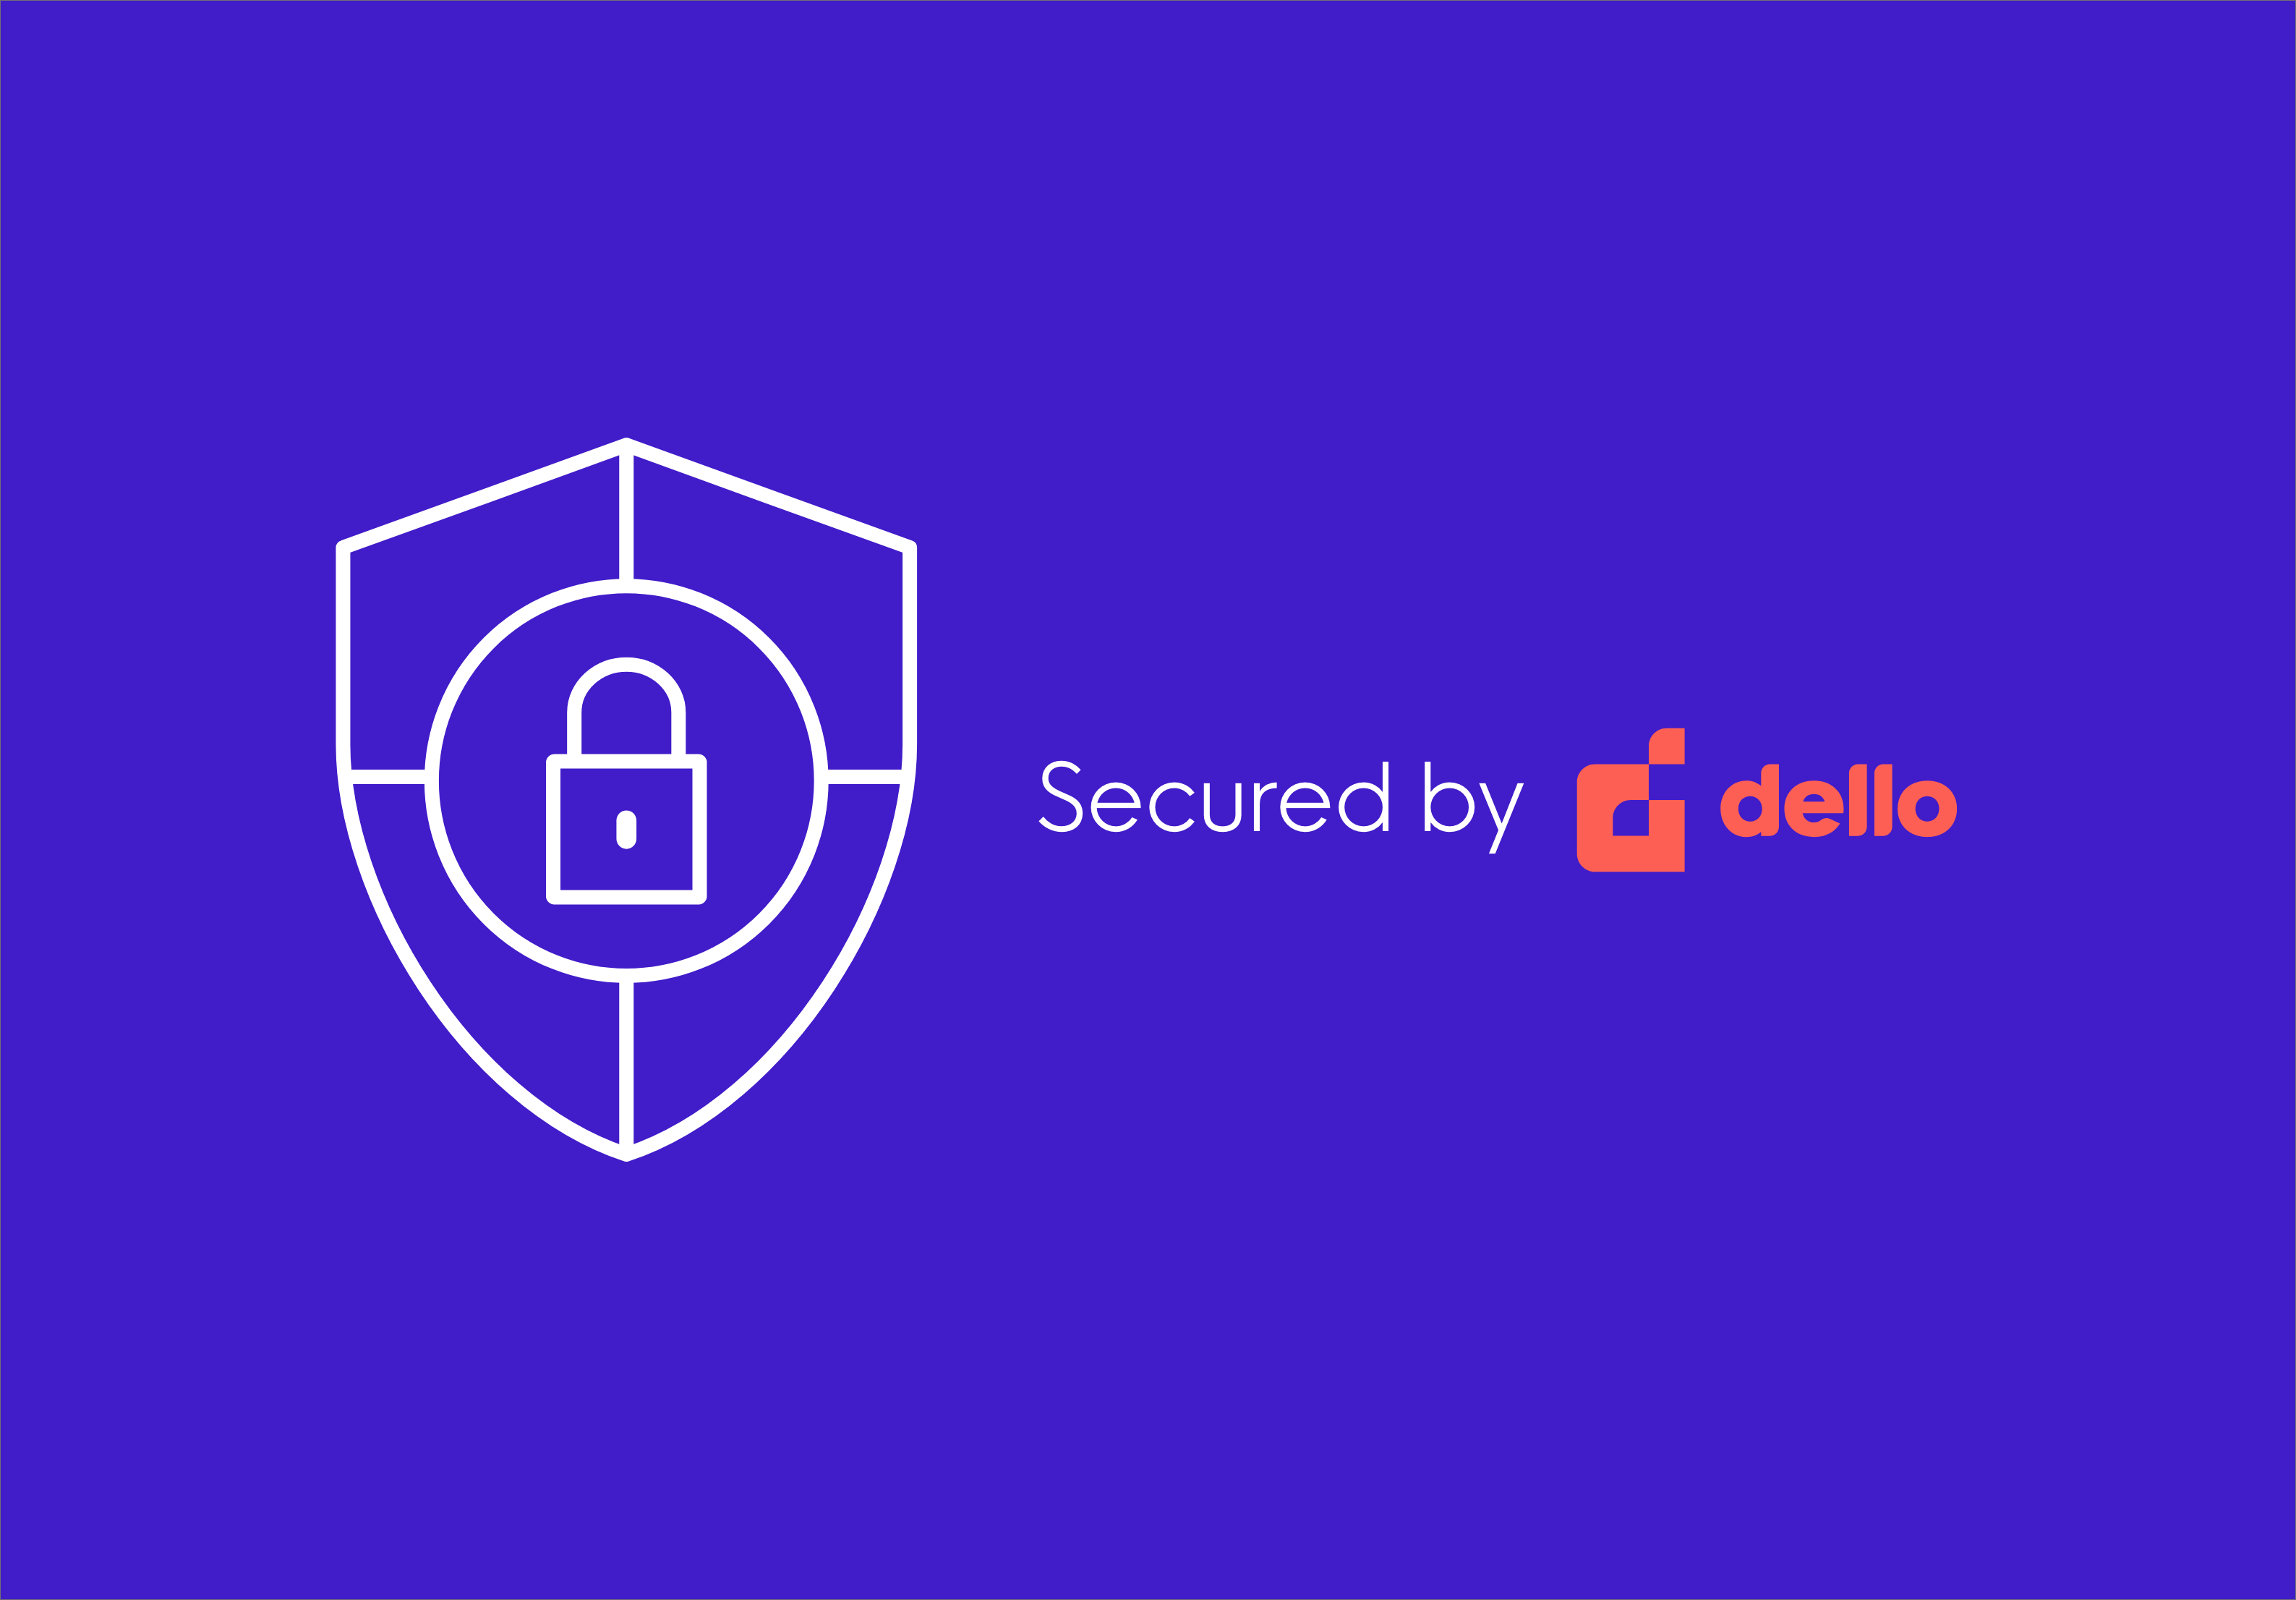 Logo indicating that the ecommerce process is secured by Dello.